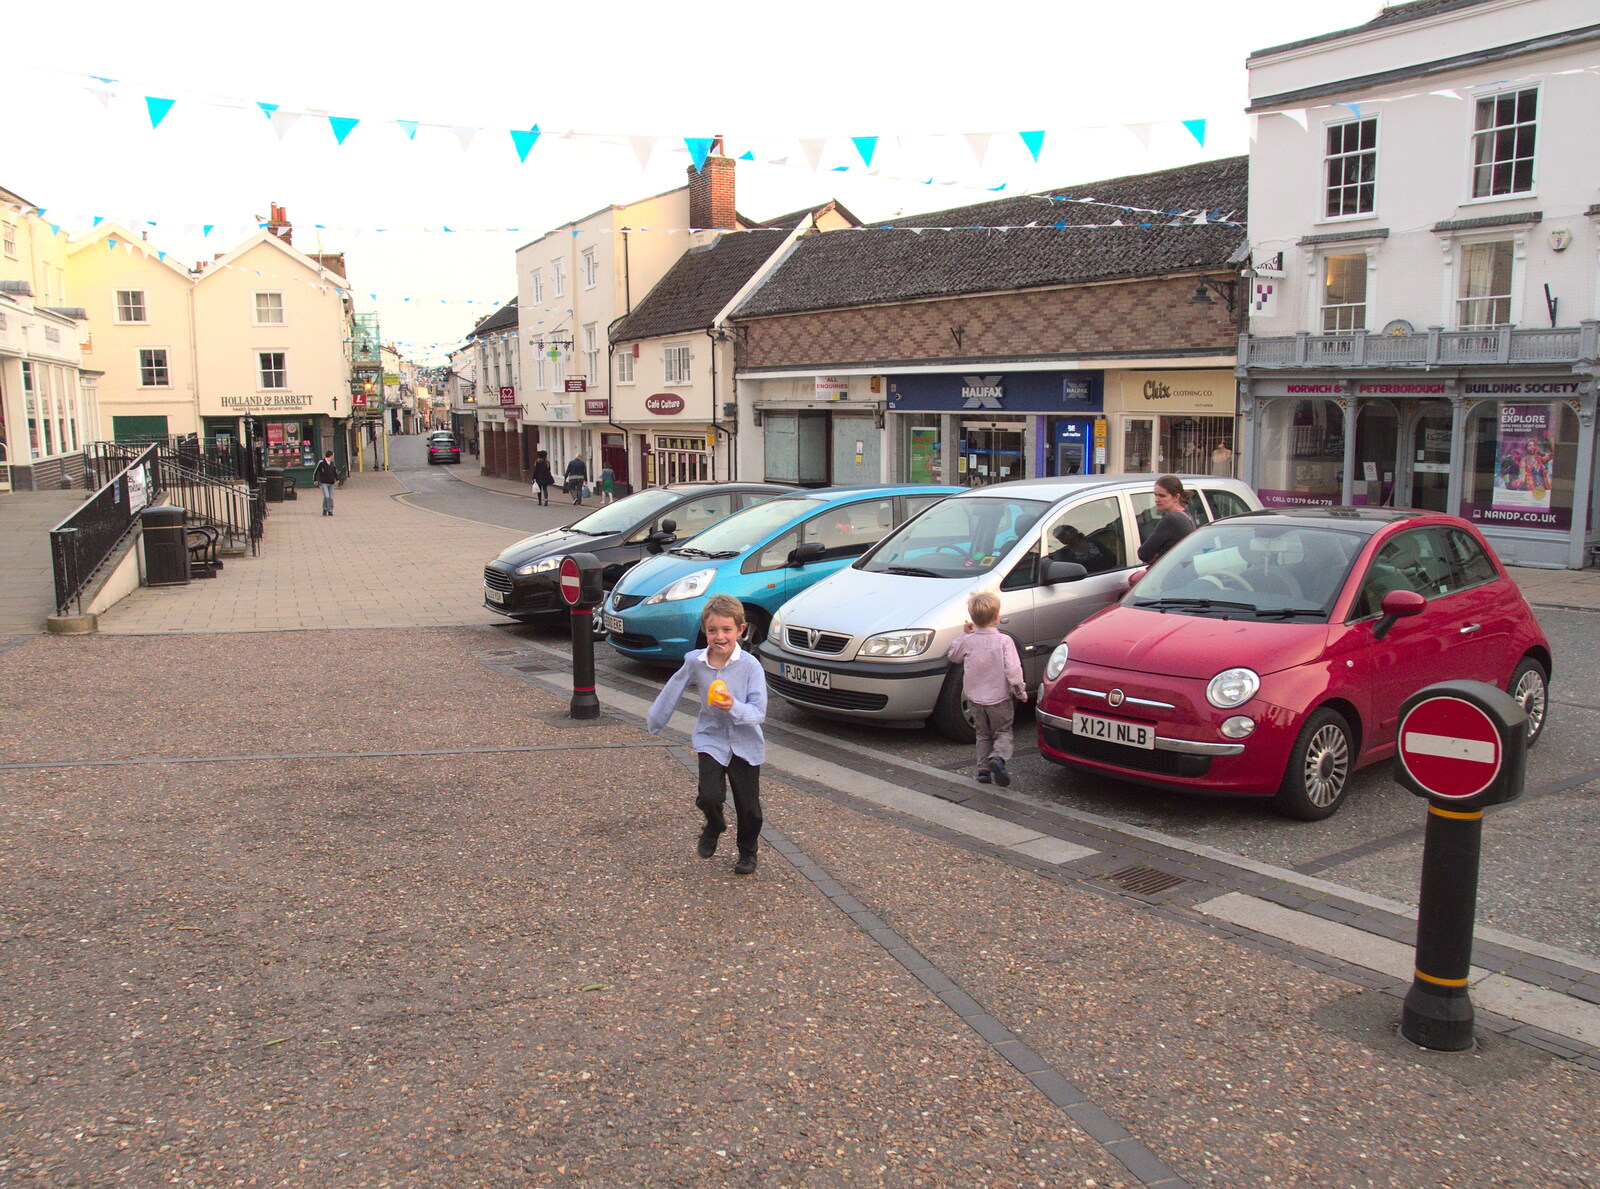 Fred runs around the market place from Fred's Camping, Curry and the Closing of B&Q, Thetford, Diss  and Ipswich - 16th July 2016